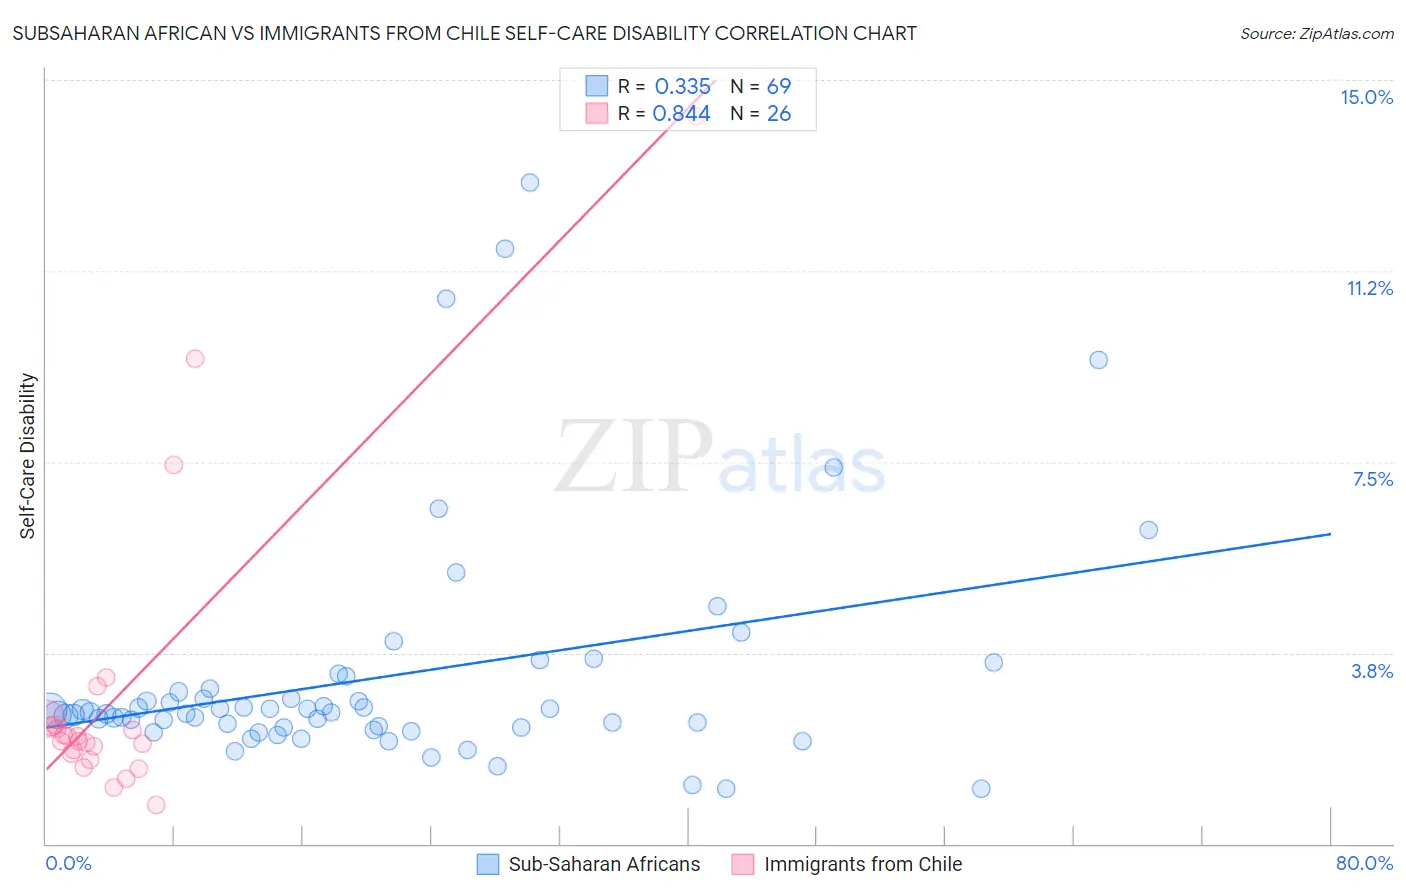 Subsaharan African vs Immigrants from Chile Self-Care Disability